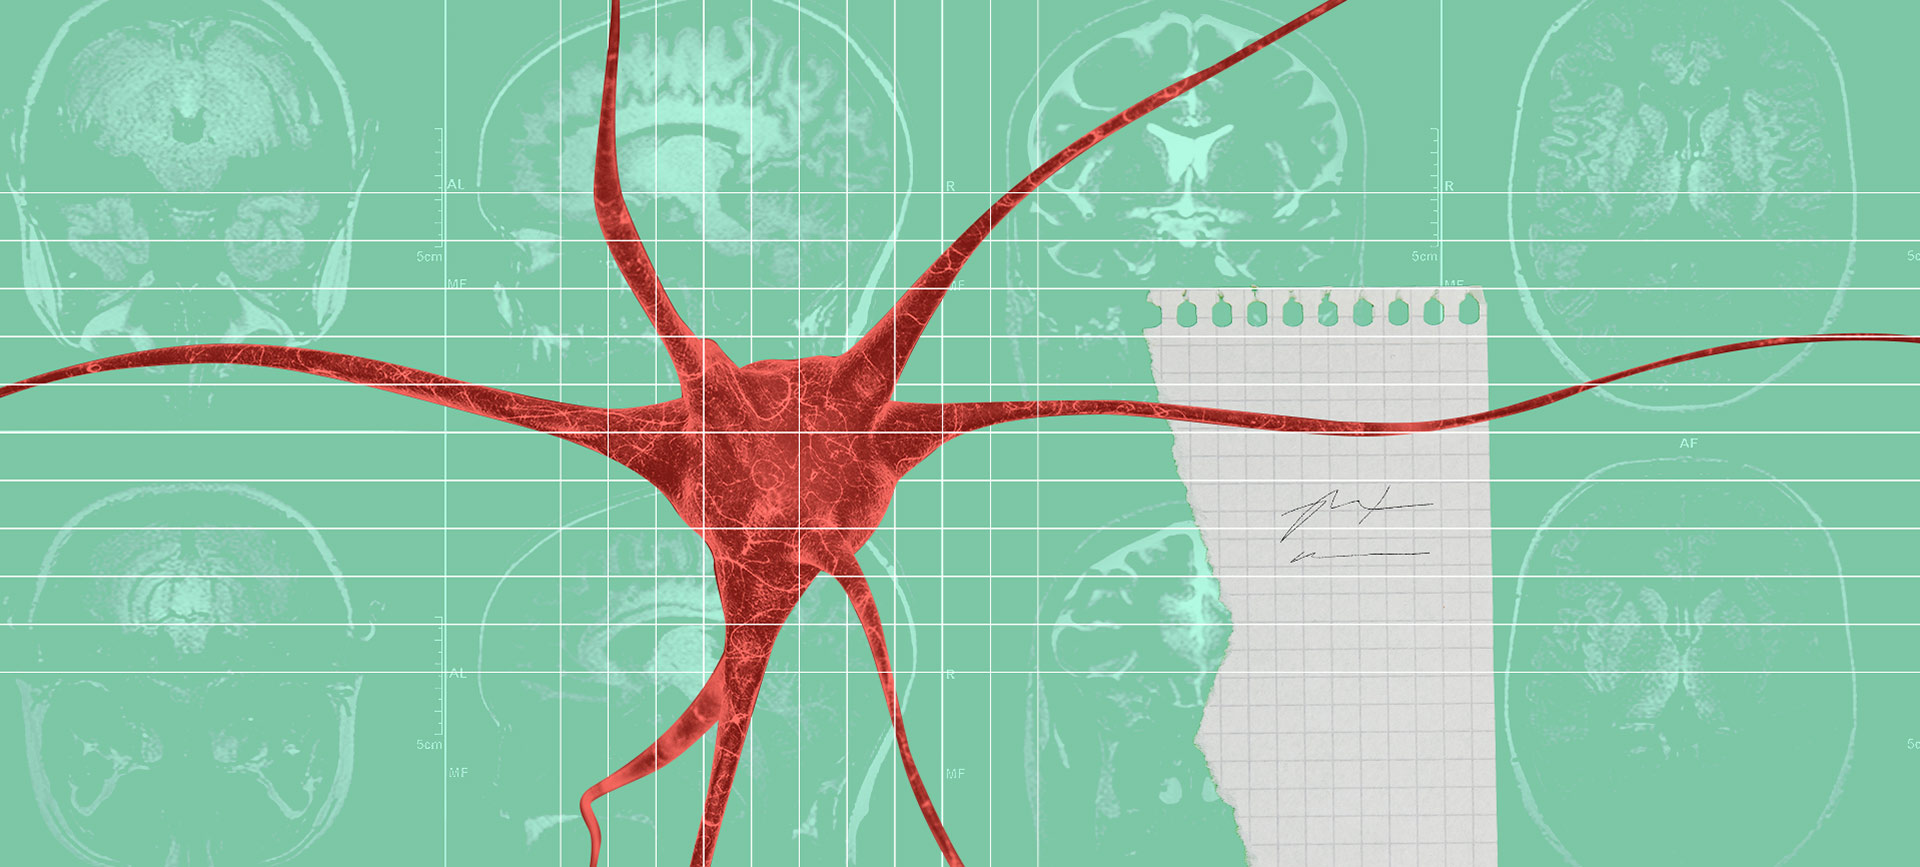 A red neuron layers over multiple green brain x-rays with a piece of graph paper beside it.